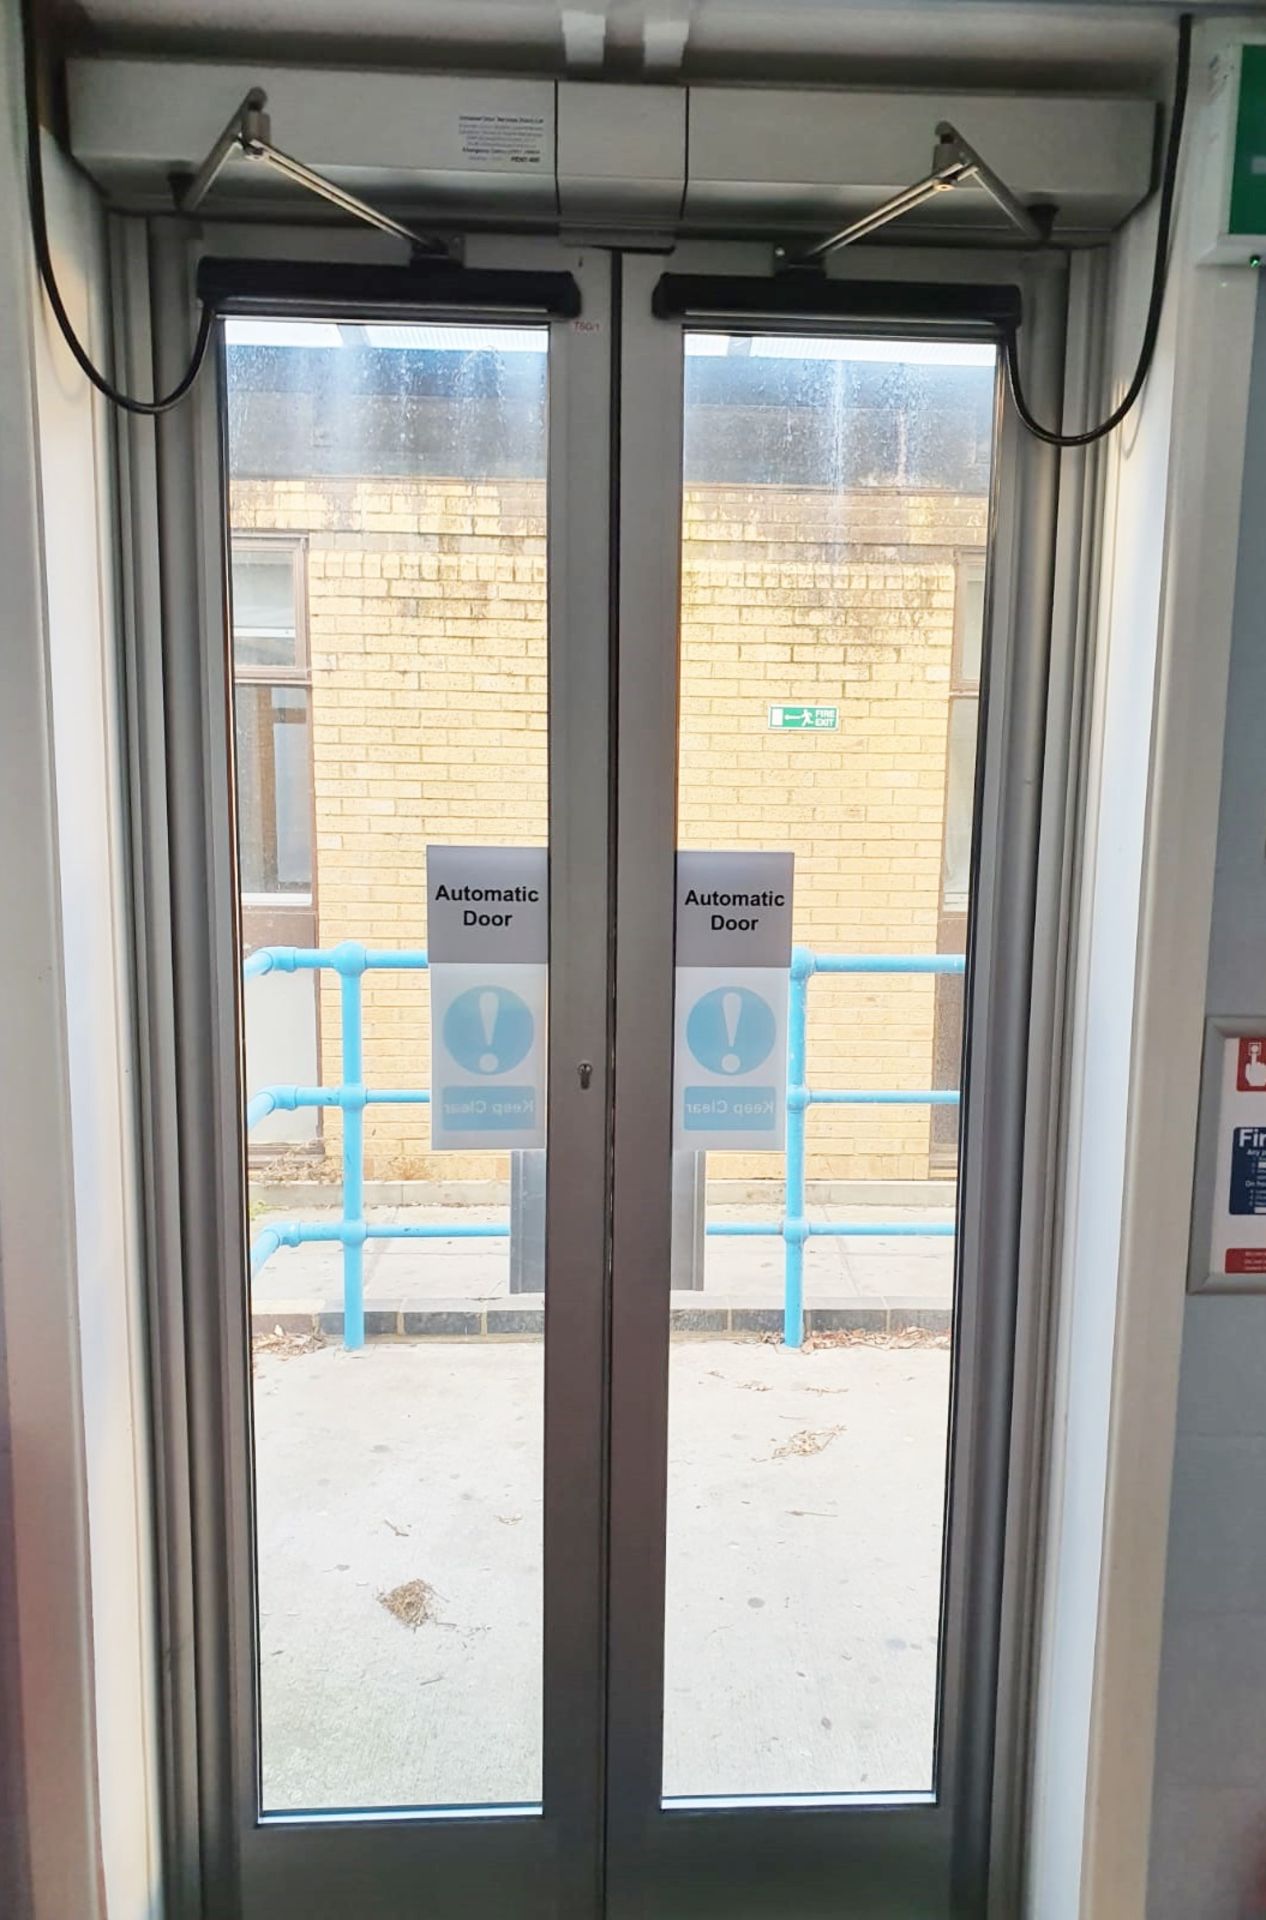 4 x Automatic External Double Doors - Metal Doors With Single Toughened Glass Panels - H240 x W123 - Image 4 of 5